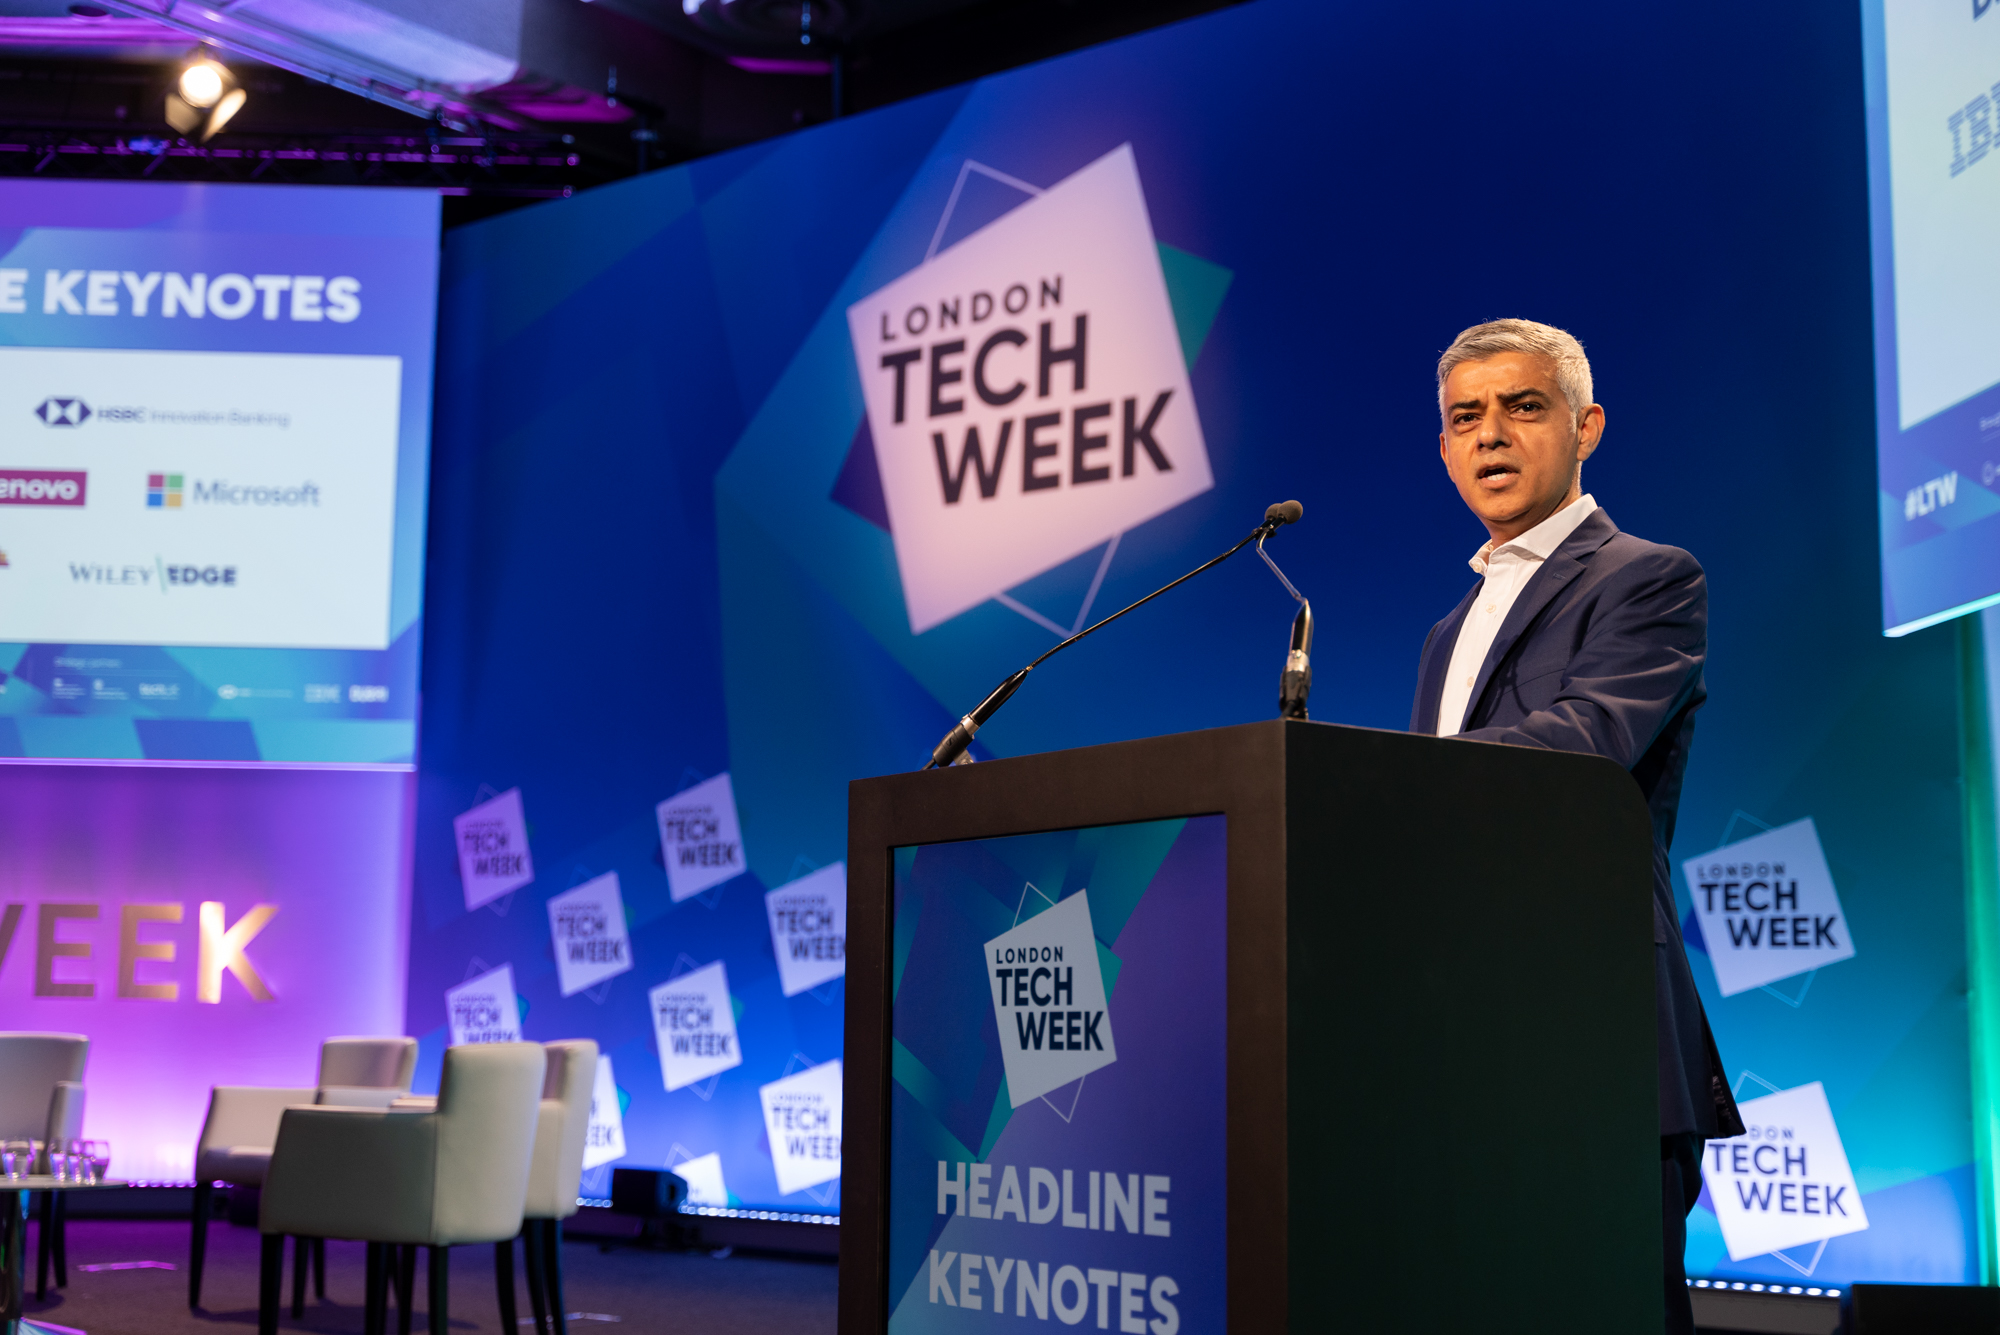 UK tech out in full force for London Tech Week 10th anniversary